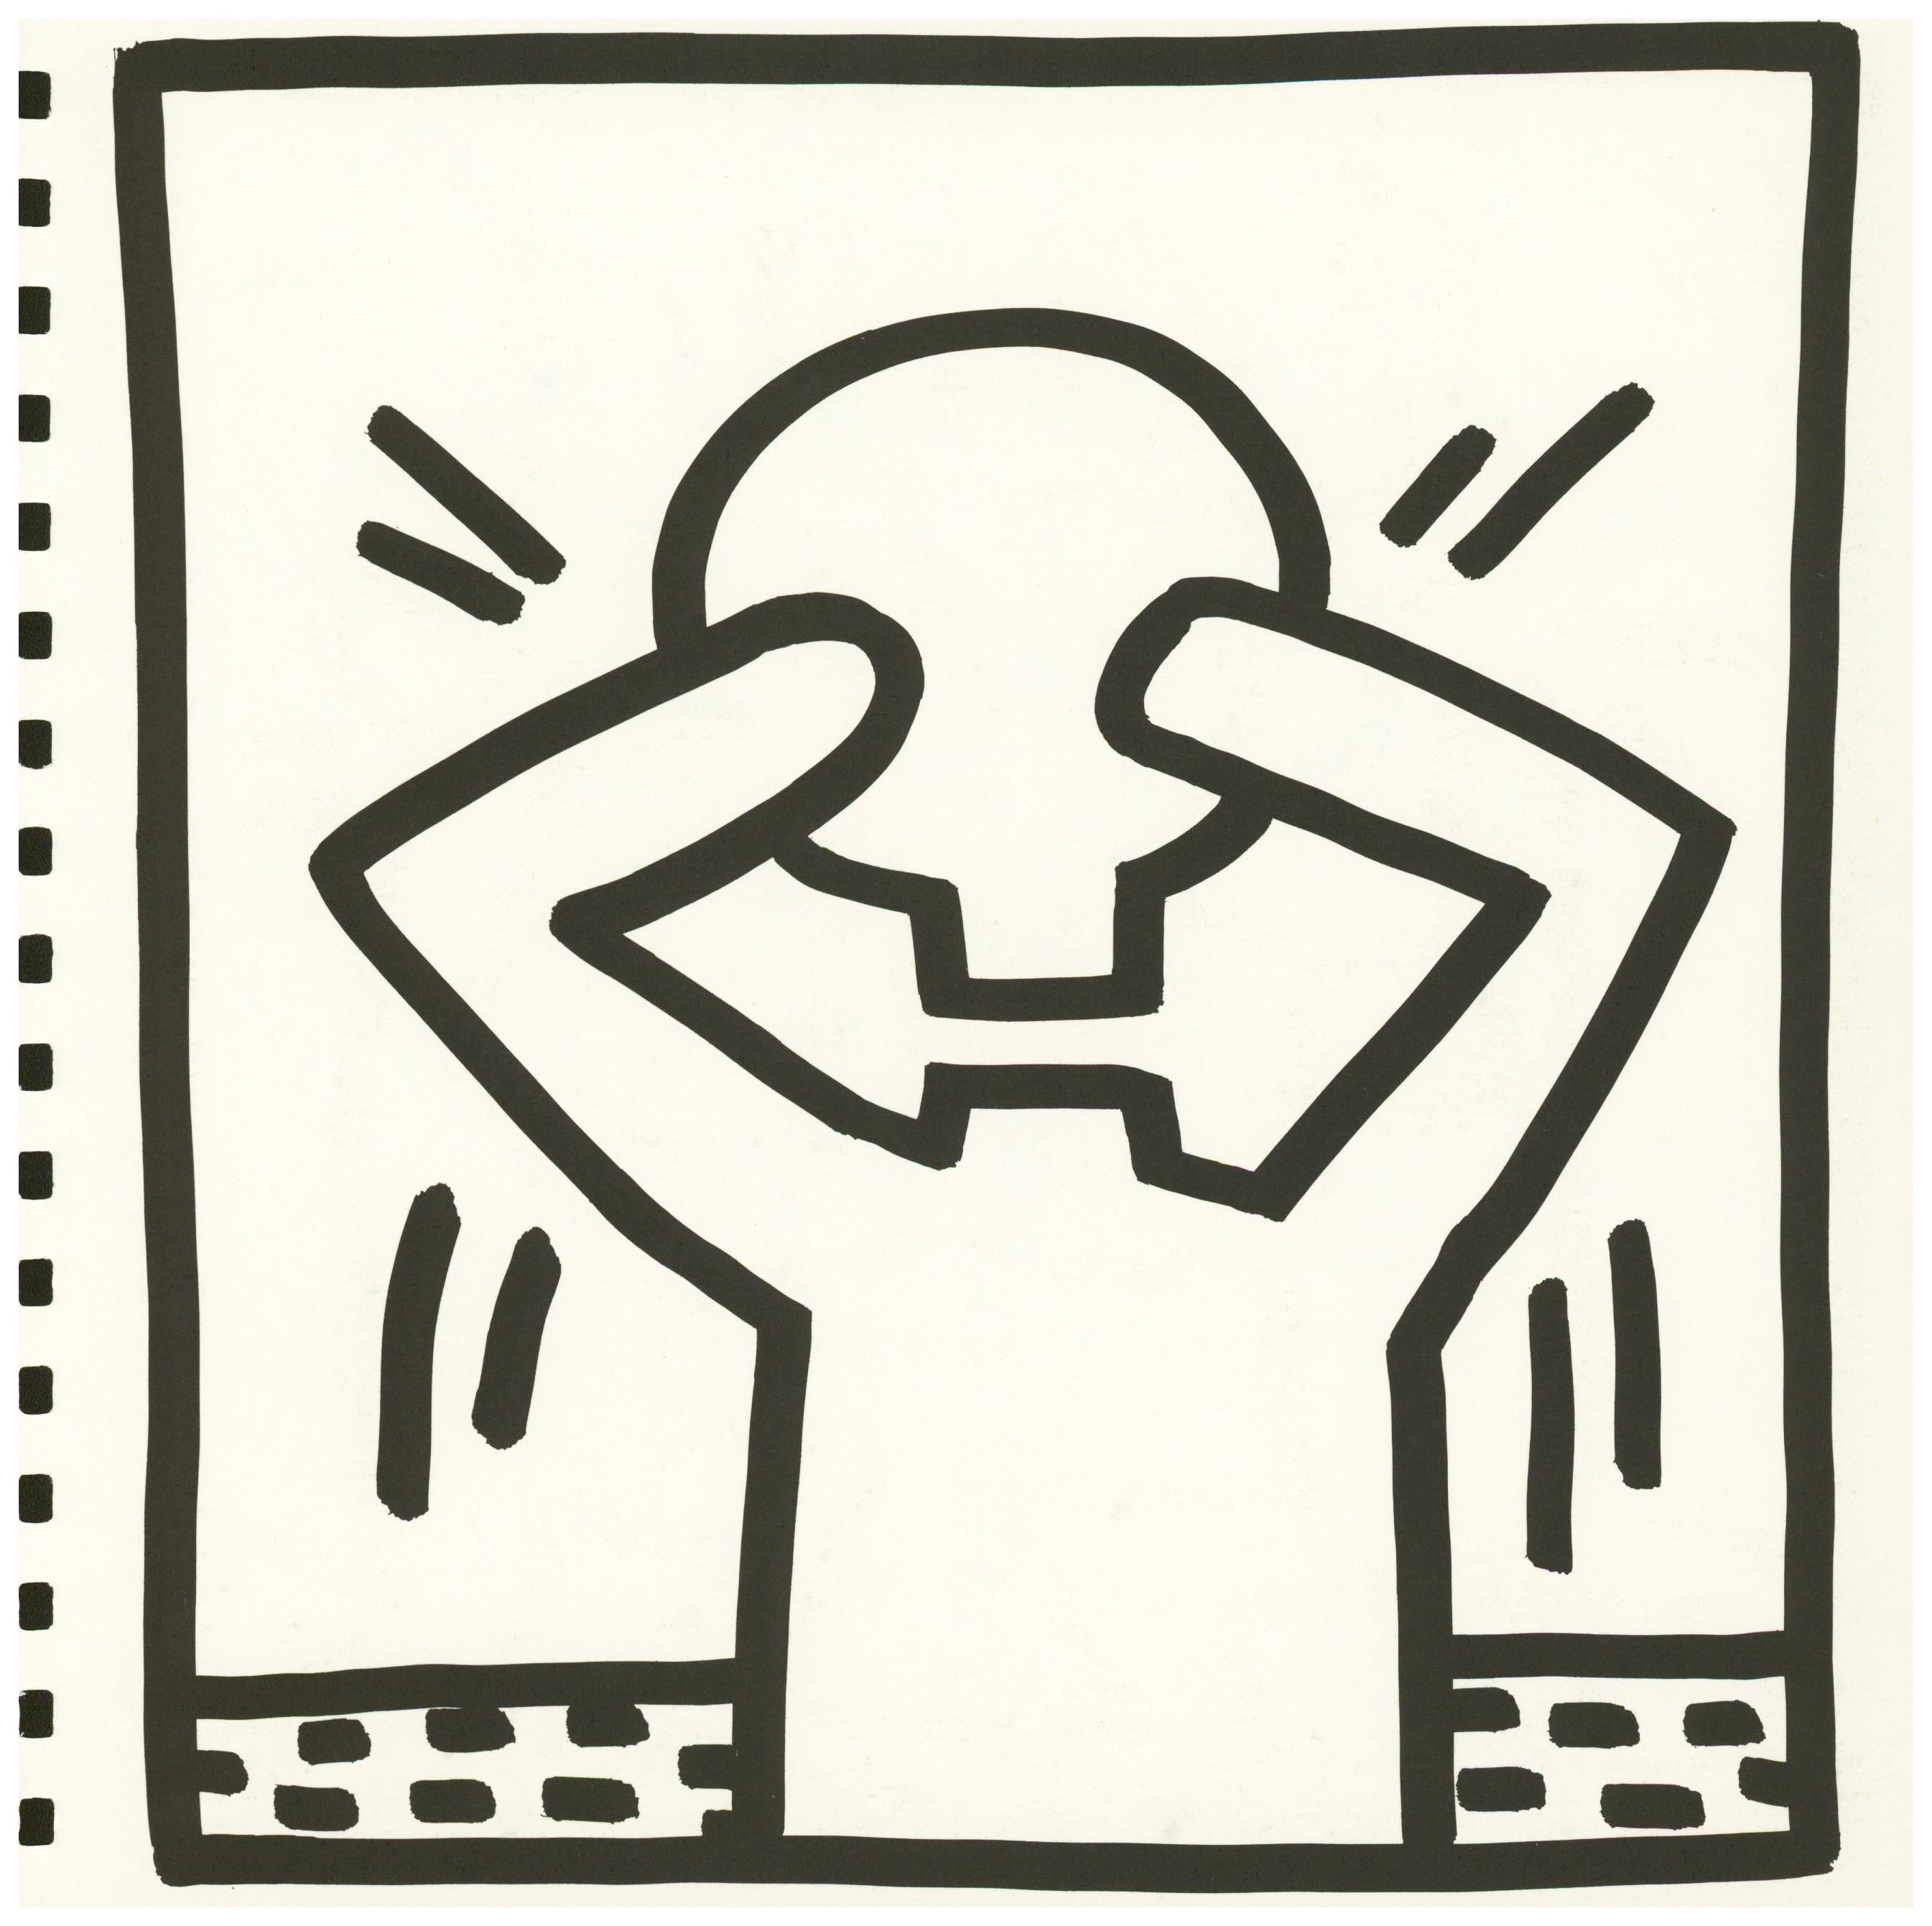 Keith Haring (untitled) figurative lithograph 1982 (Keith Haring prints) - Print by (after) Keith Haring